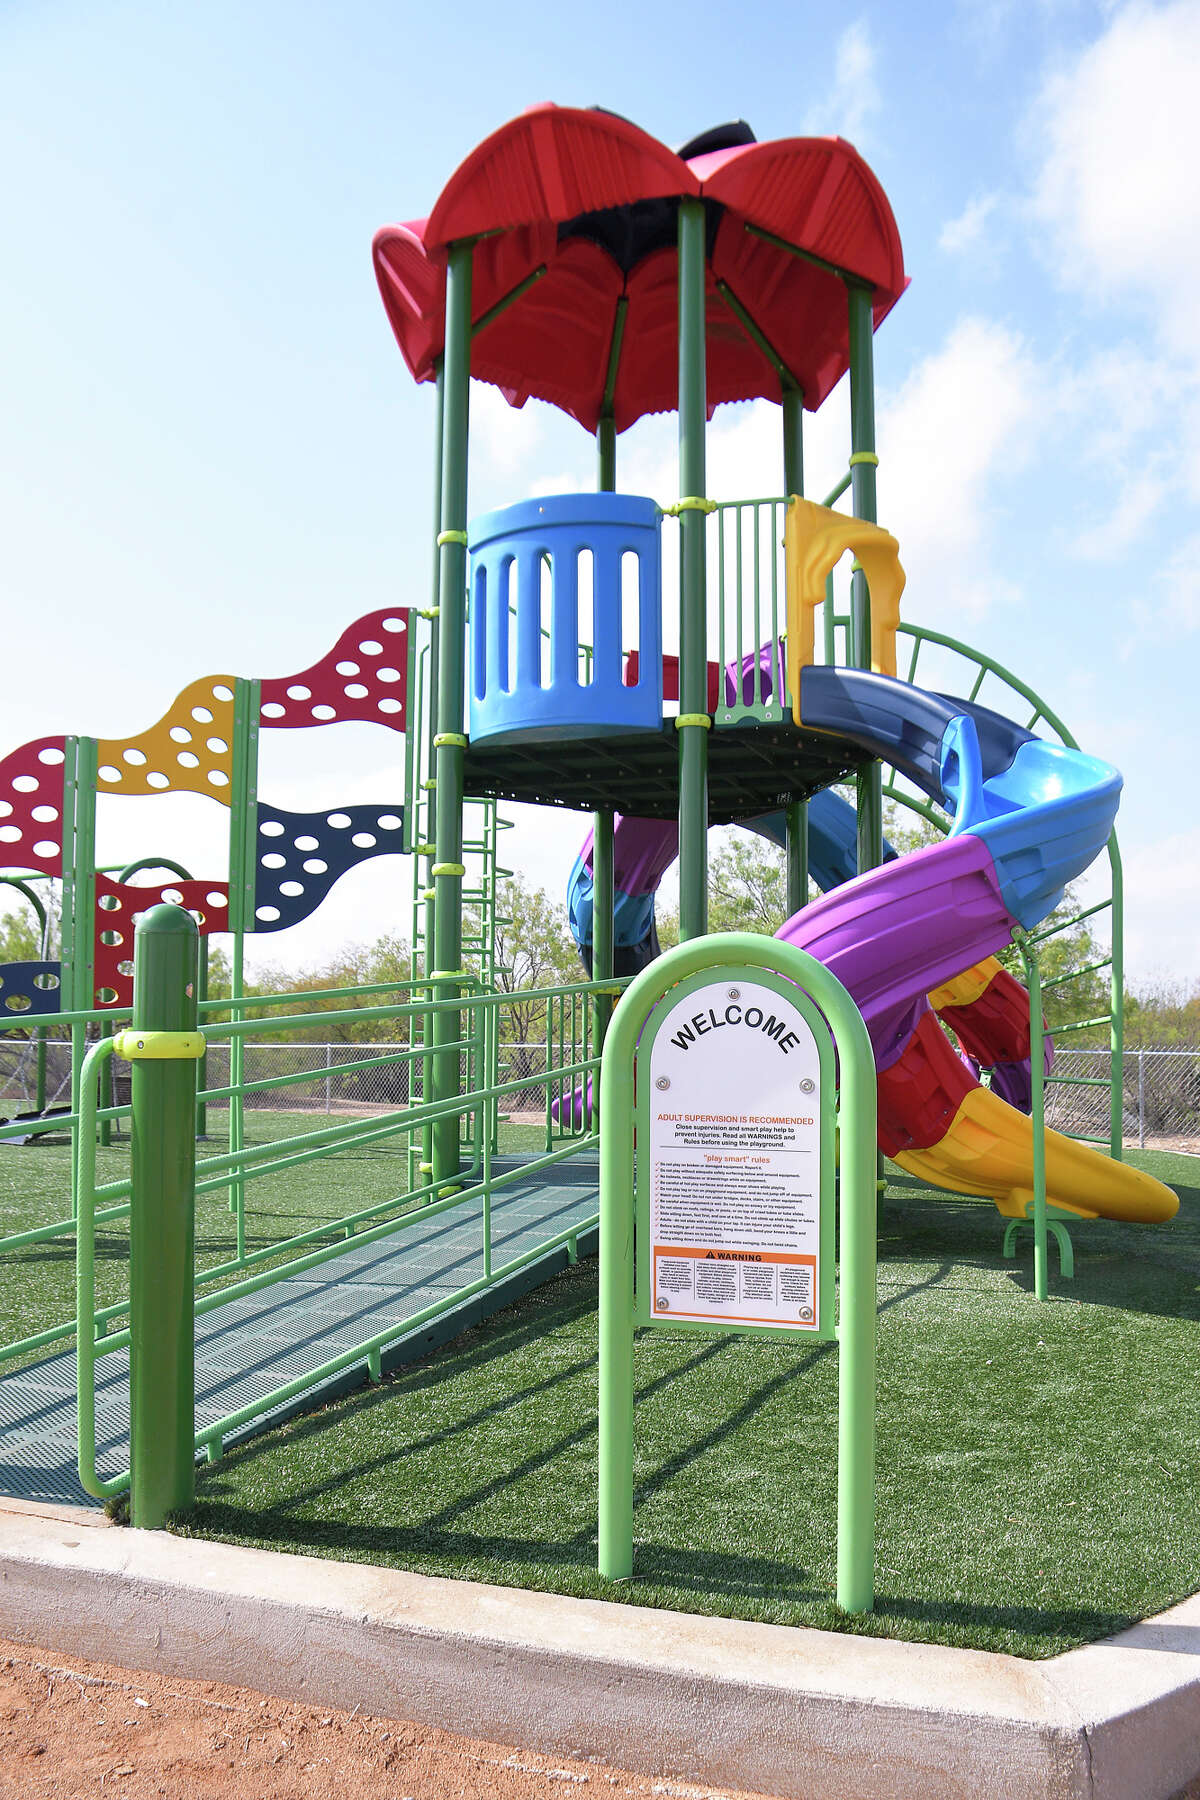 Although students are out for Spring Break local playgrounds and parks are empty because of the Coronavirus disease (COVID-19) situation.